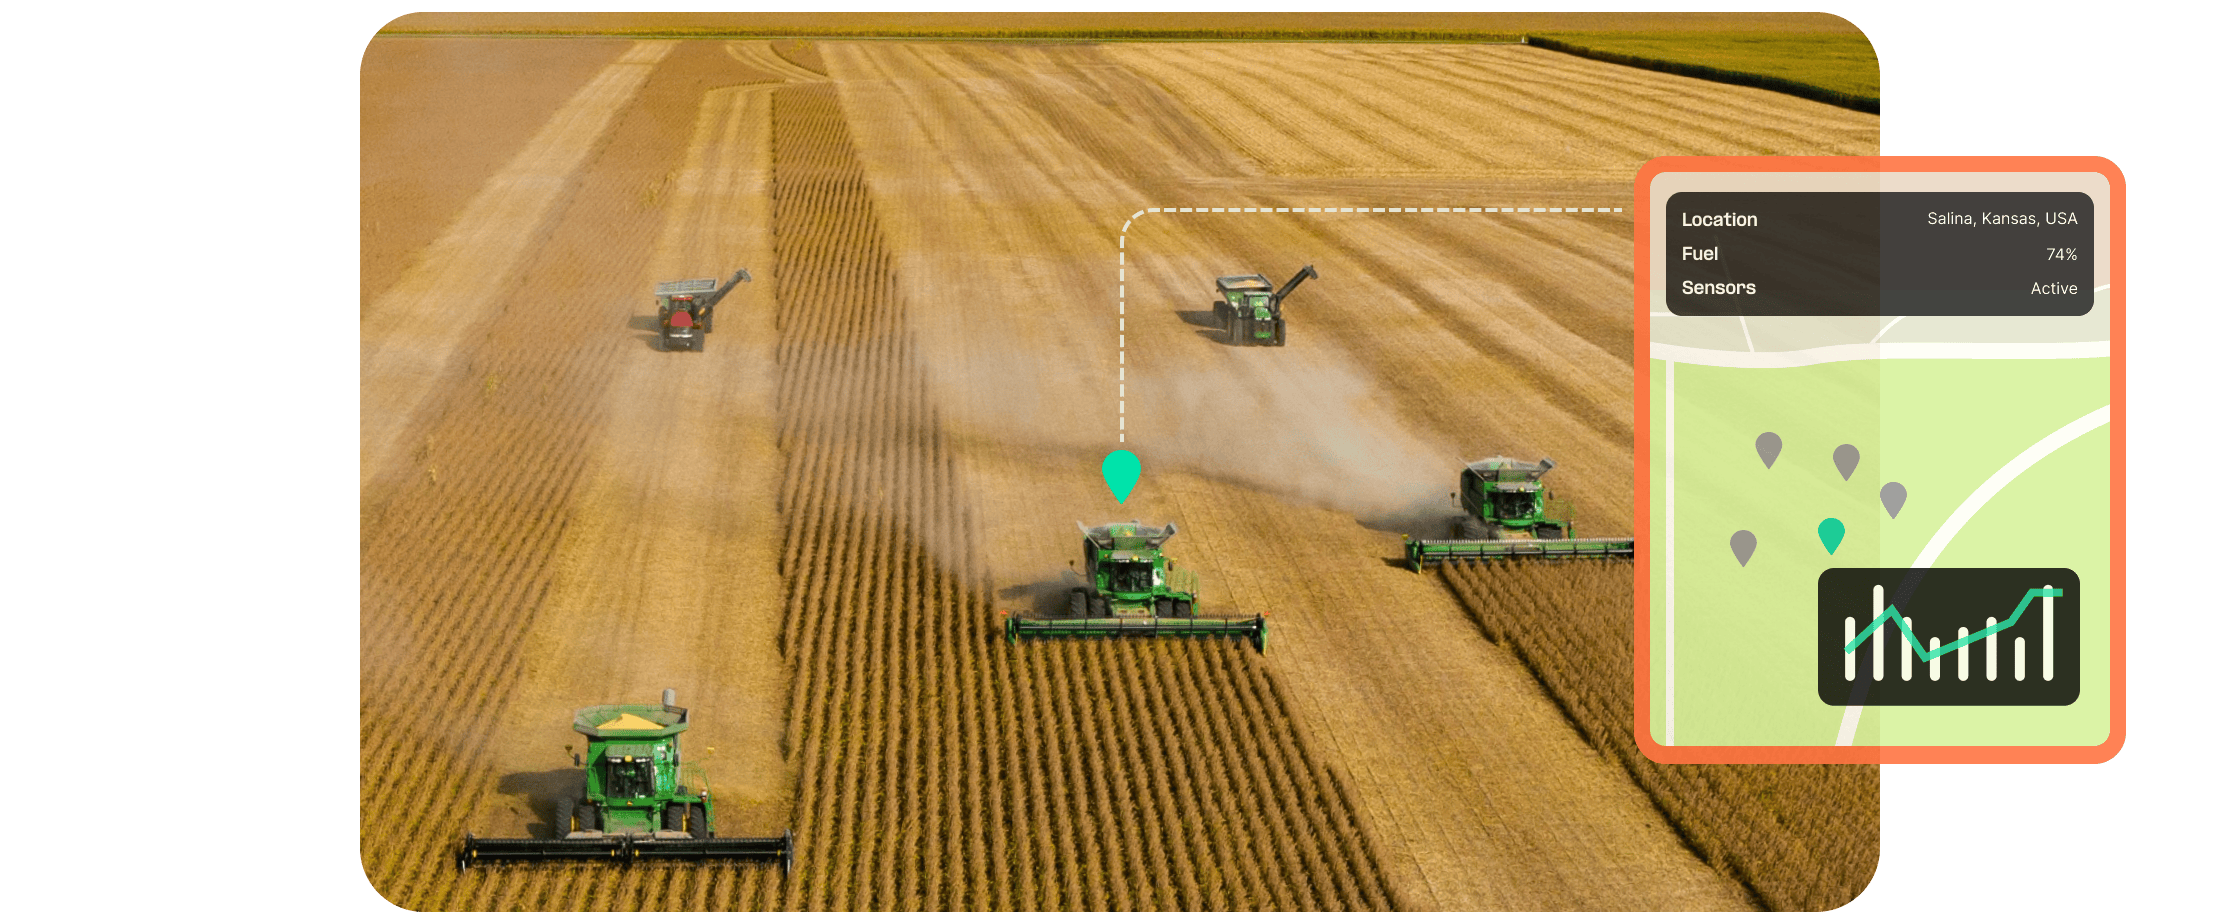 Smart farming machines with GPS tracker and analytics